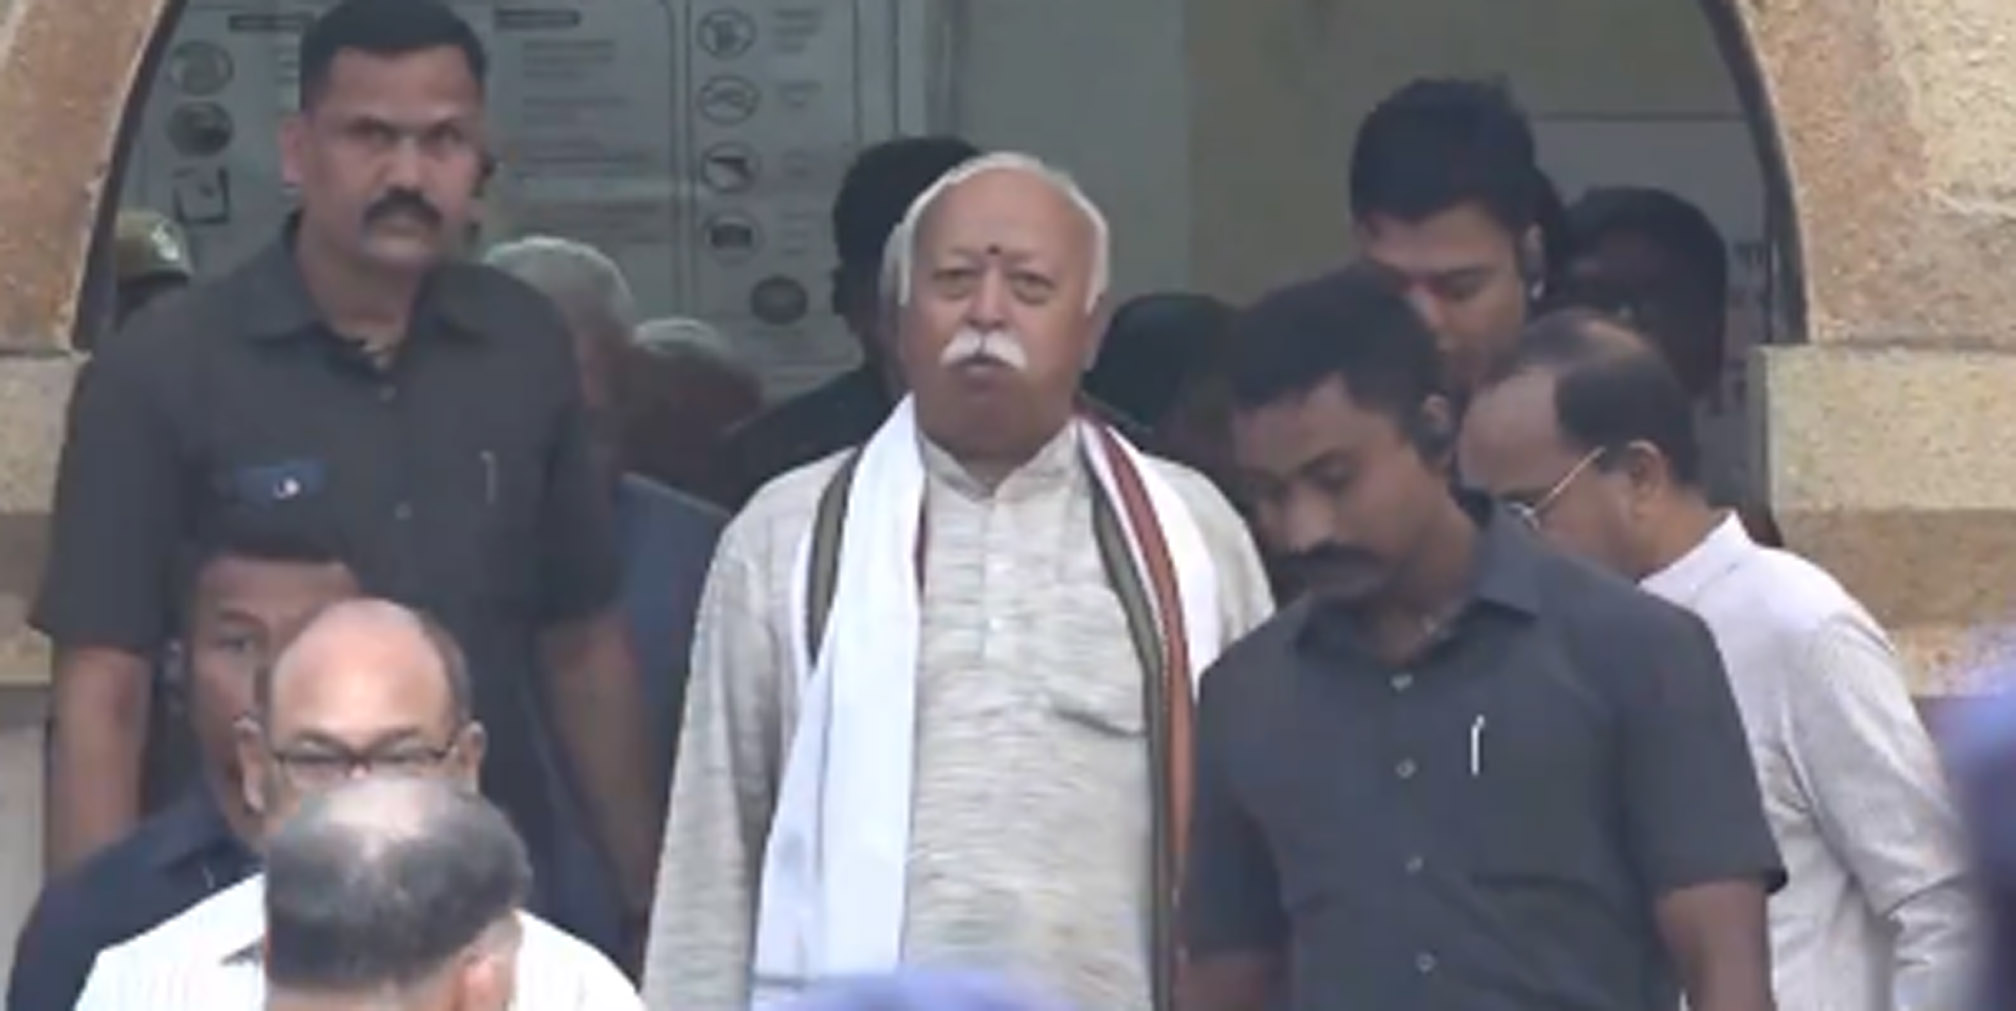 Bhagwat Casts His Ballot In Nagpur, Urges Voters To Come Out And Exercise Their Franchise